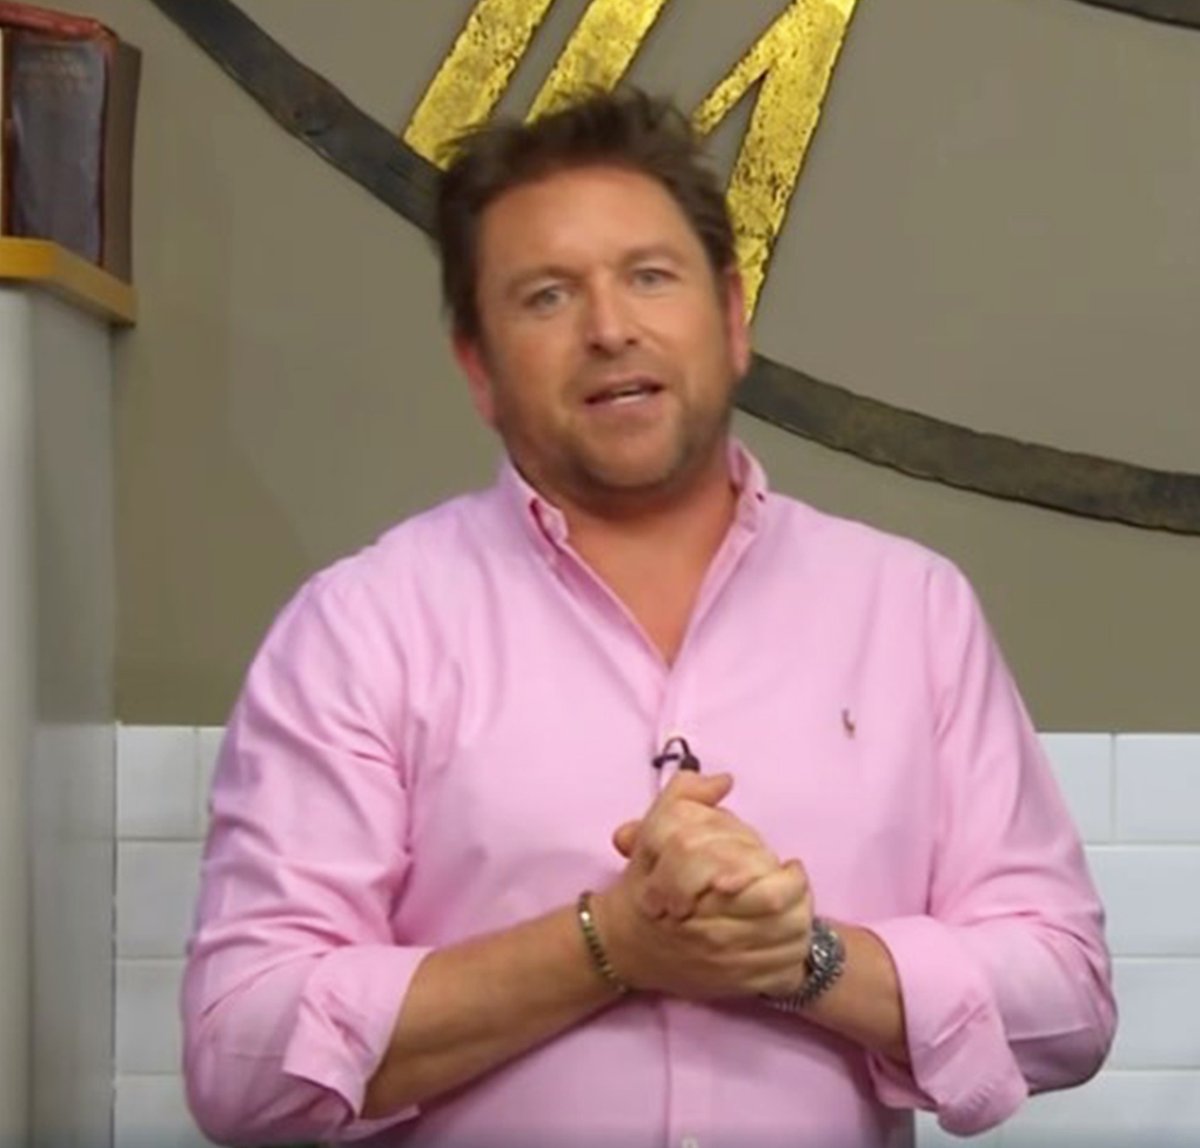 James Martin reveals behind-the-scenes show secret to coping with ‘severe’ health issue #SaturdayMorning #JamesMartin express.co.uk/showbiz/tv-rad…